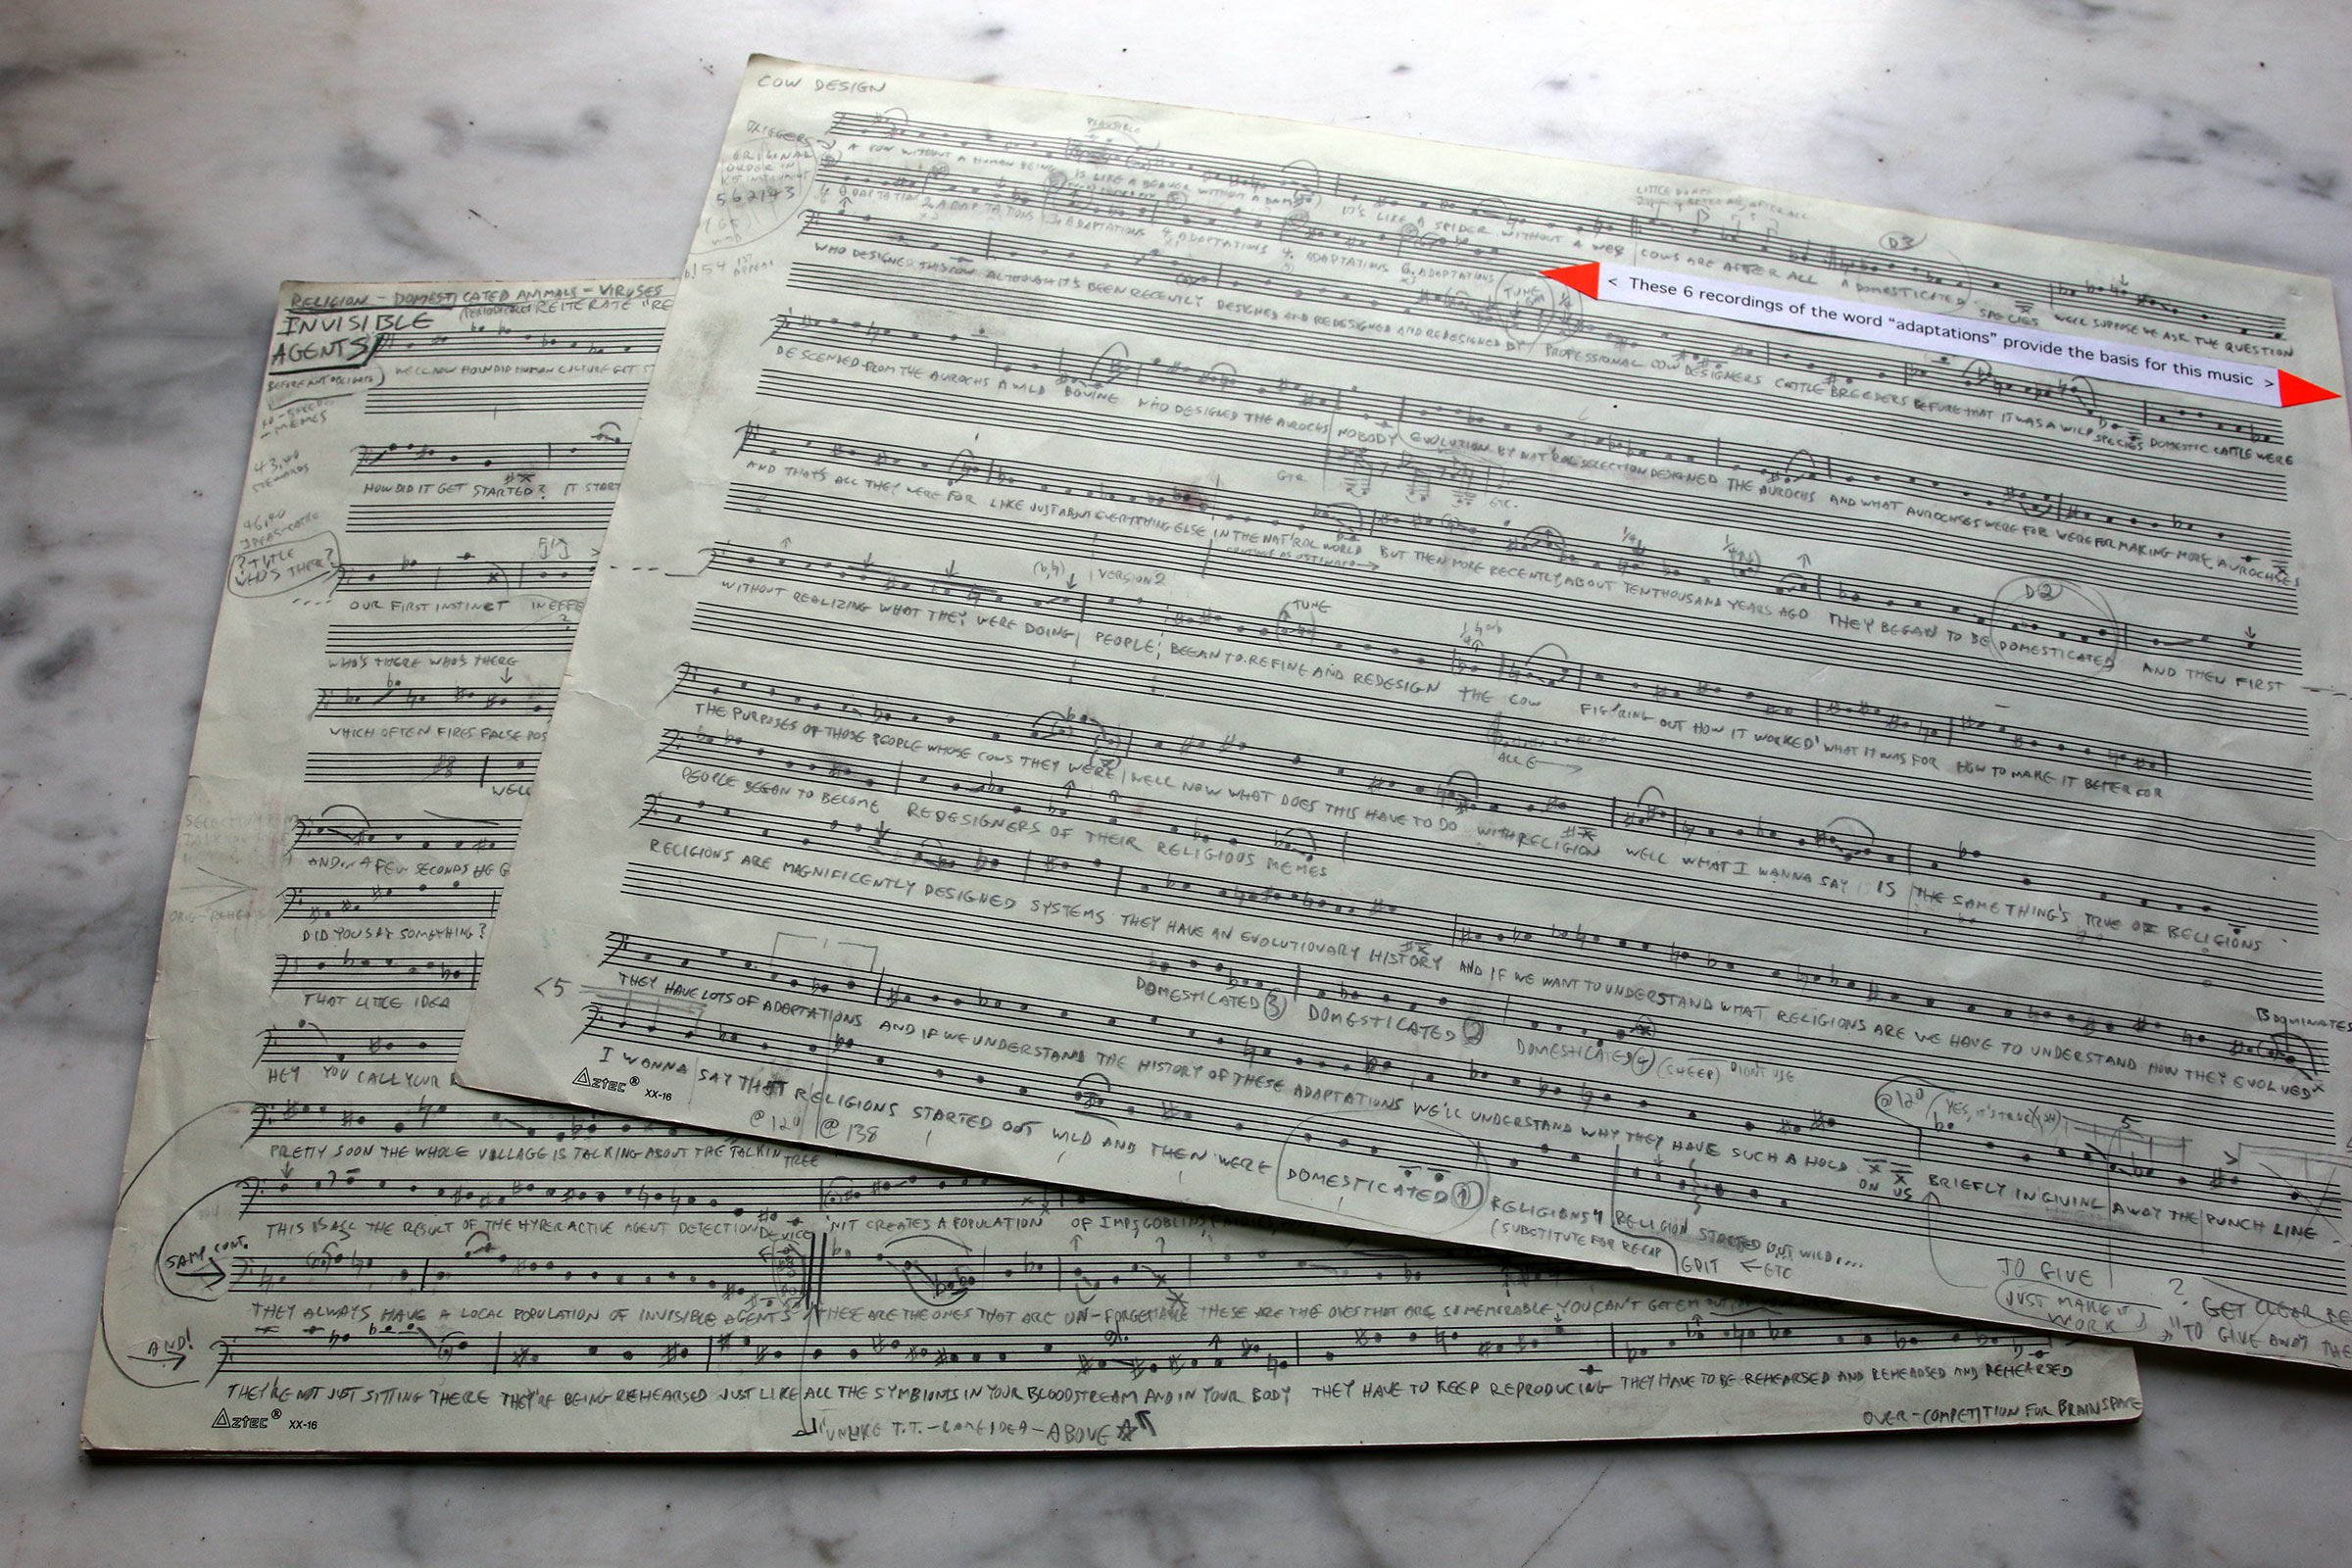 Several of the 11 by 17 pieces of music manuscript paper containing Scott Johnson's transcriptions of Dan Dennett's speech.